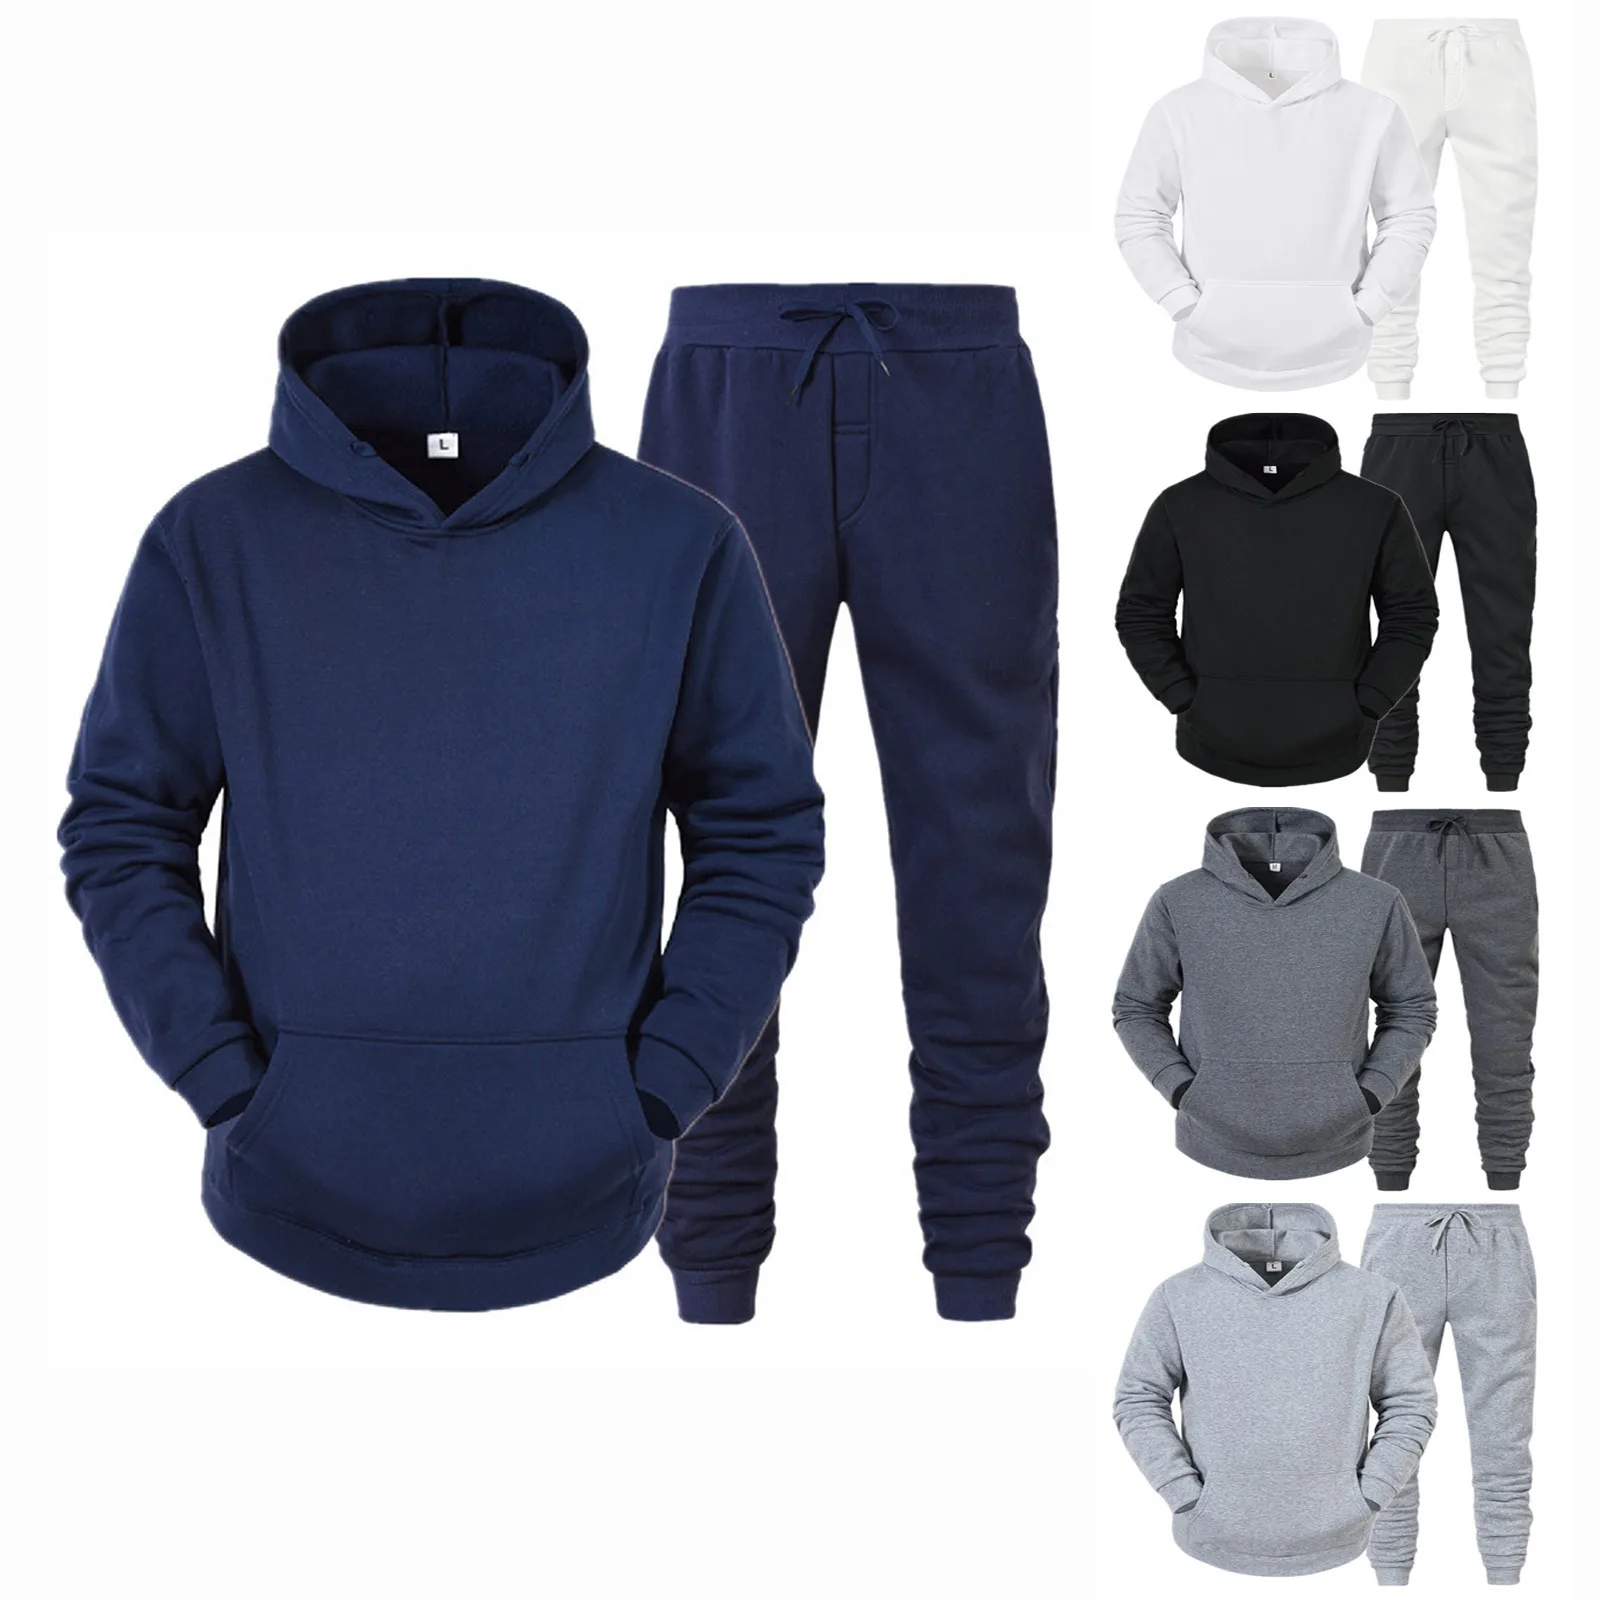 

Men's Sport Suit Hoodies+Pants Tracksuits Solid Pullovers Jackets Sweatershirts Sweatpants Hooded Casual Streetwear Outfits